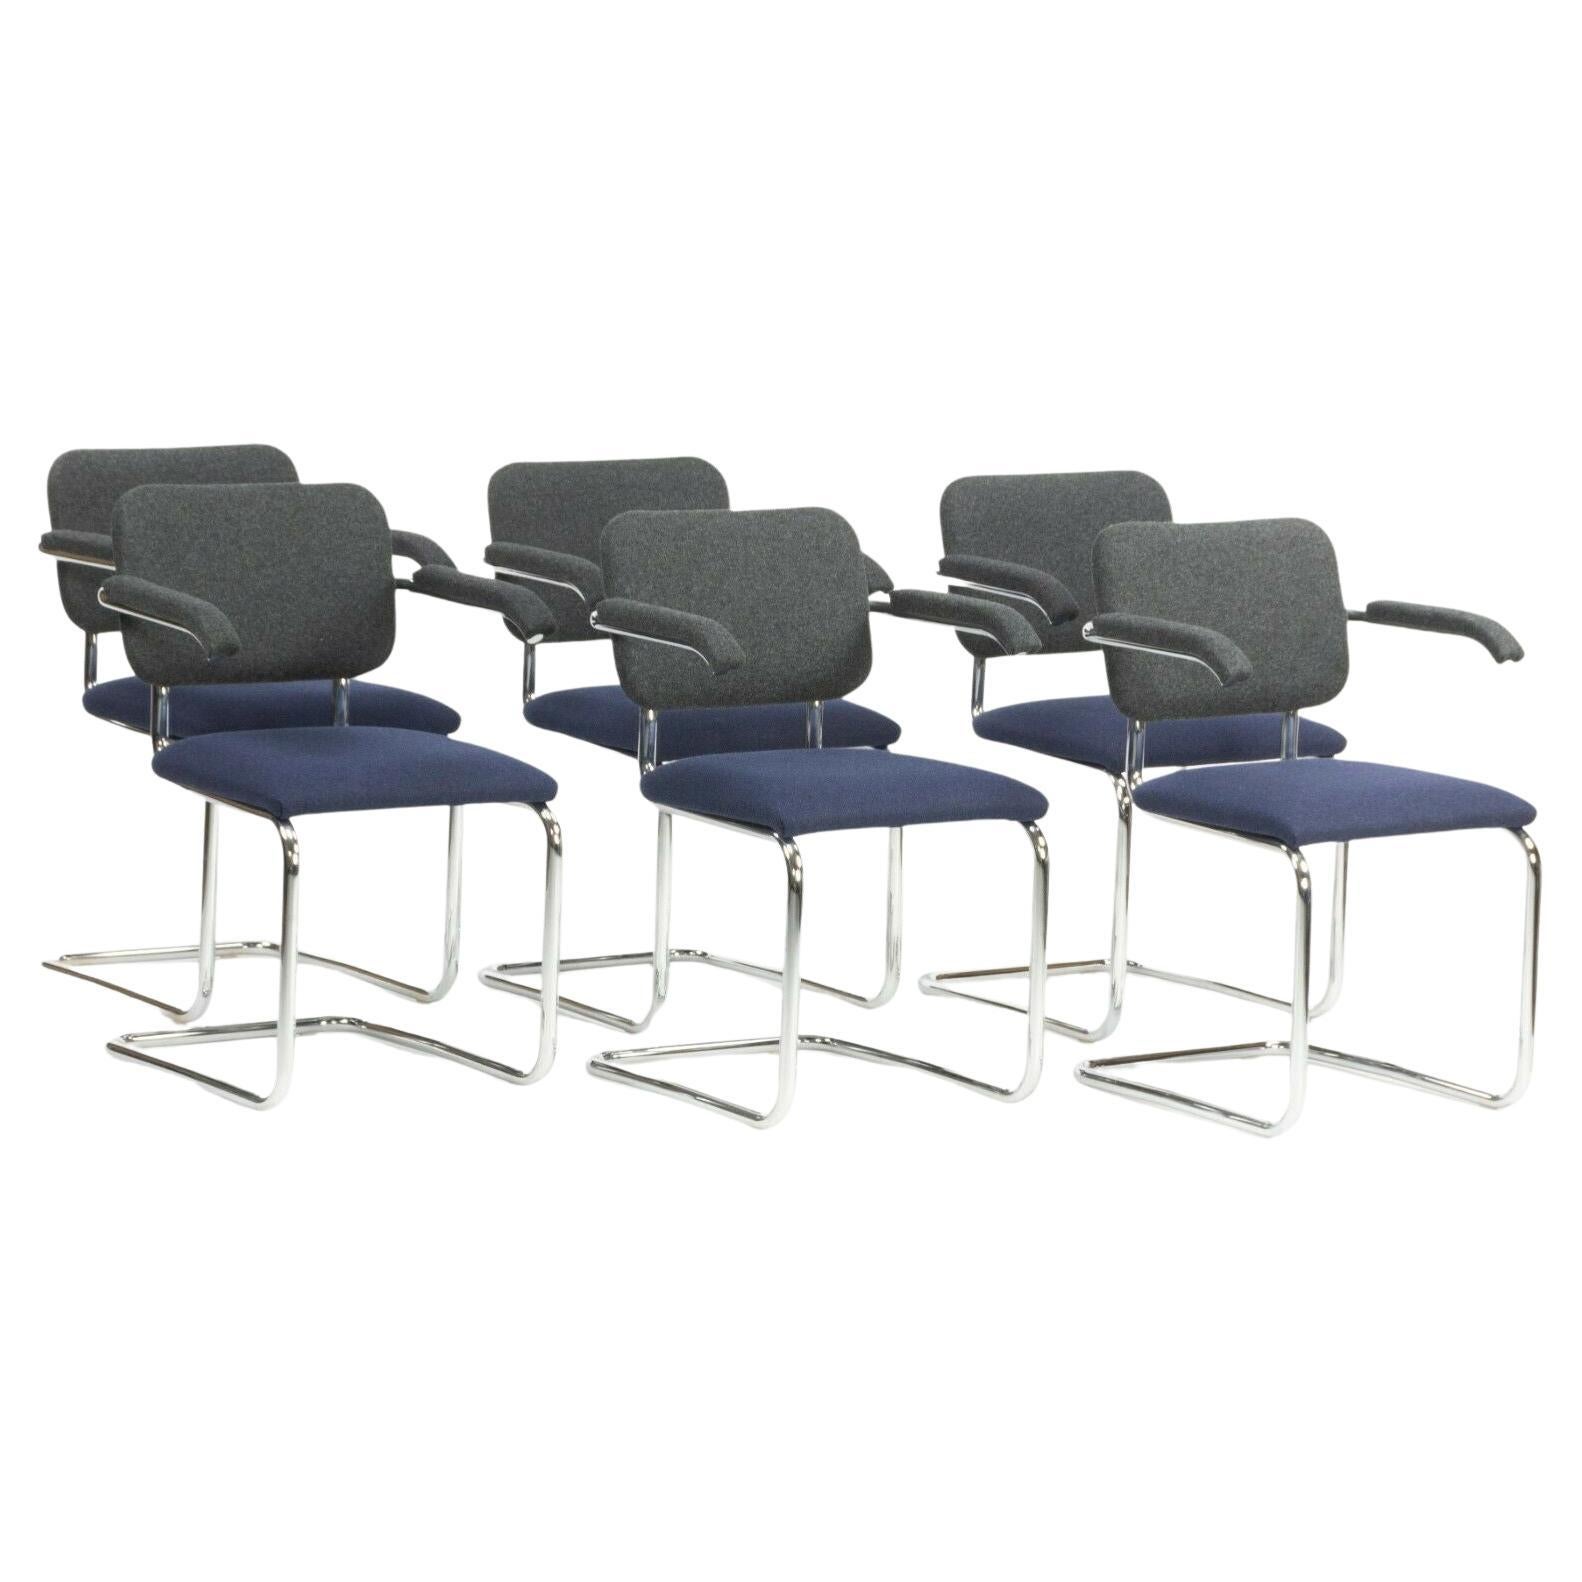 2018 Set of 6 Marcel Breuer for Knoll Studio Navy/Black Fabric Cesca Arm Chairs